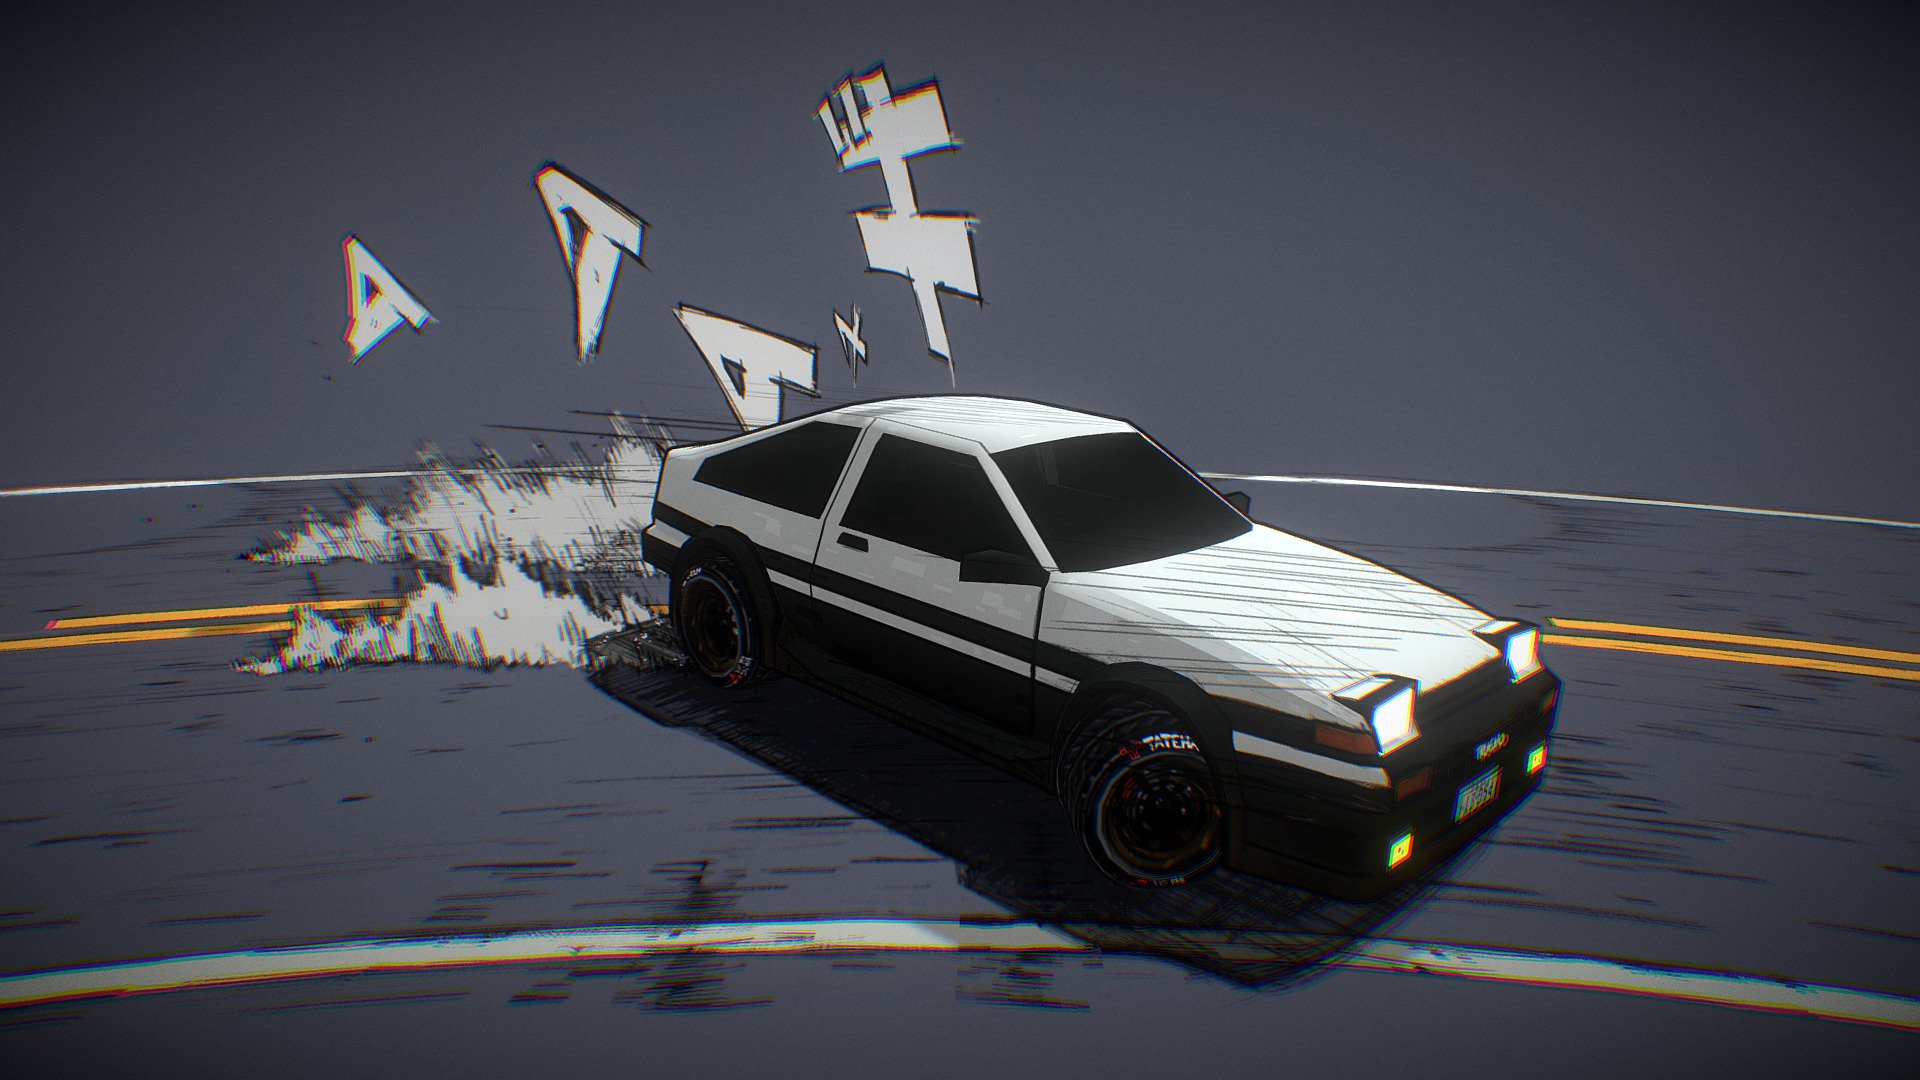 Here is a Toyota AE86 Trueno in the middle of a Drift.

This is my take on Initial D from which this model is obviously inspired.

I wanted to get closer to a NPR/Sketchy/Manga look and I'm pretty happy with the result.

I hope you like it!

This scene was made for the #SketchfabWeeklyChallenge

Edit :  This is the original version I made for the Challenge. I made a slowmotion animated version afterwards, which you can find here : https://skfb.ly/ozKon - Drifting AE86 - 3D model by FoG Ryû (@FoGRyu) 3d model